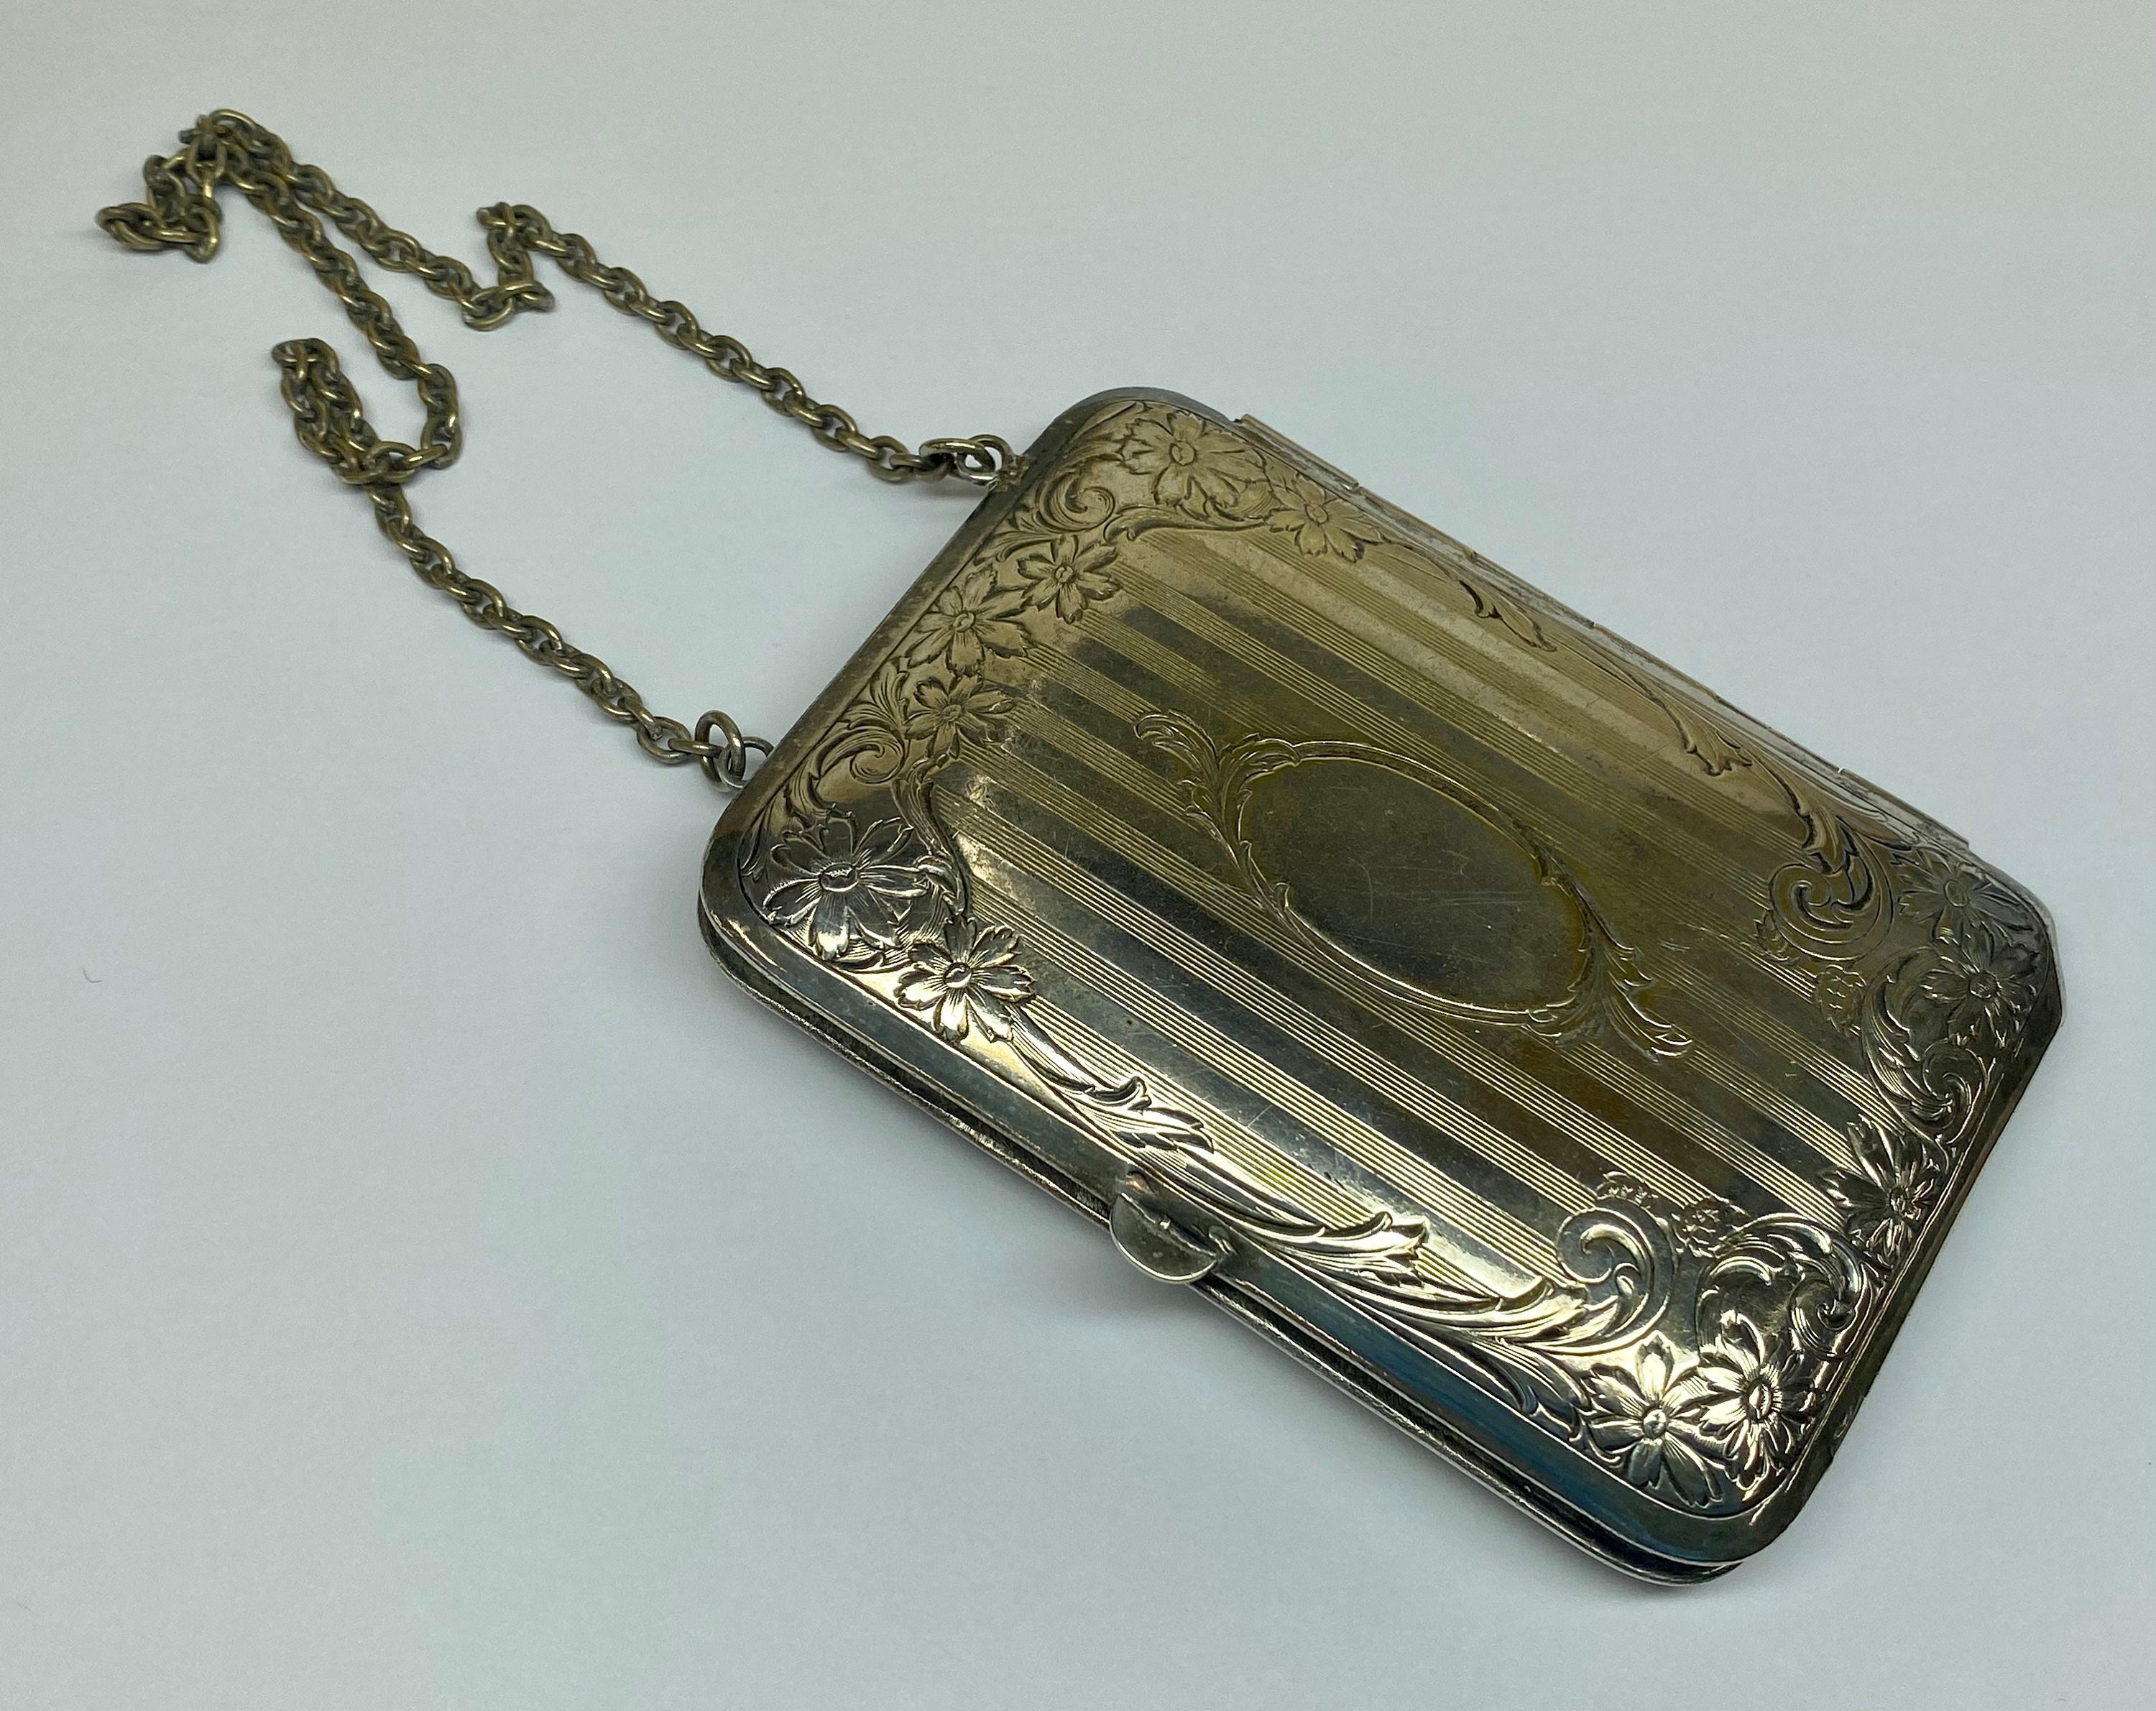 Sold at Auction: ANTIQUE W.H. SAART CO STERLING SILVER COIN PURSE